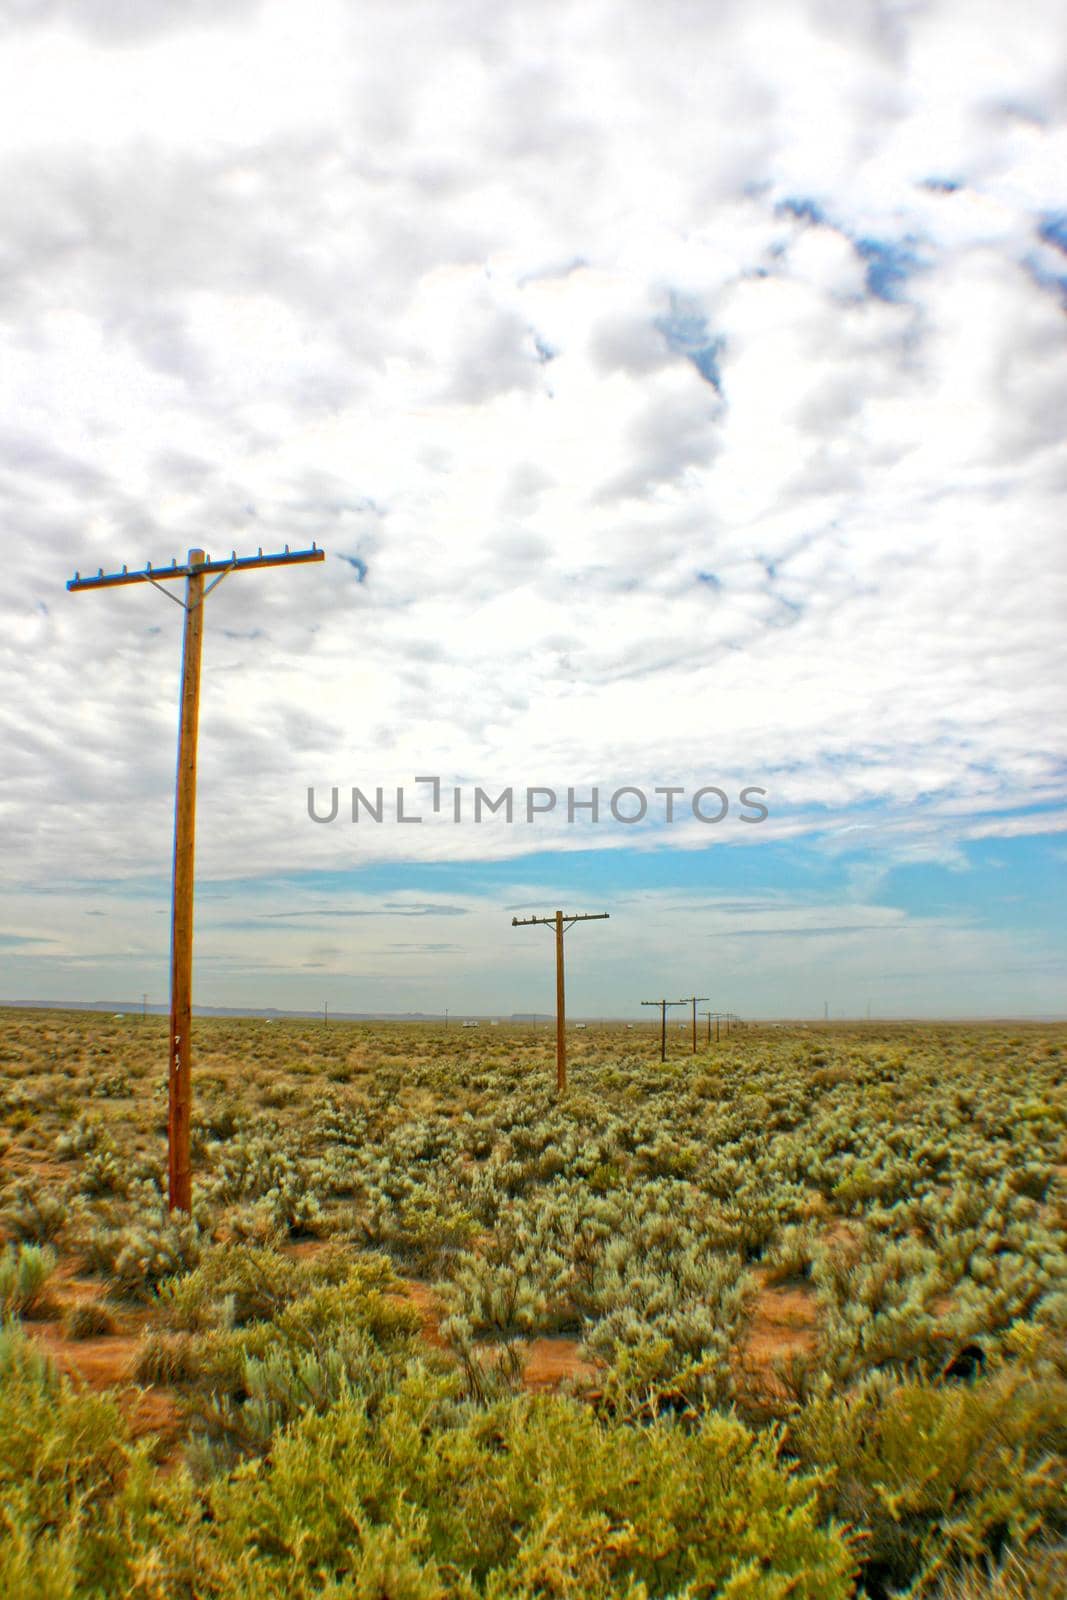 Image of Depth shot of telephone poles and lines stretching into the distance along a landscape of green scrub brush